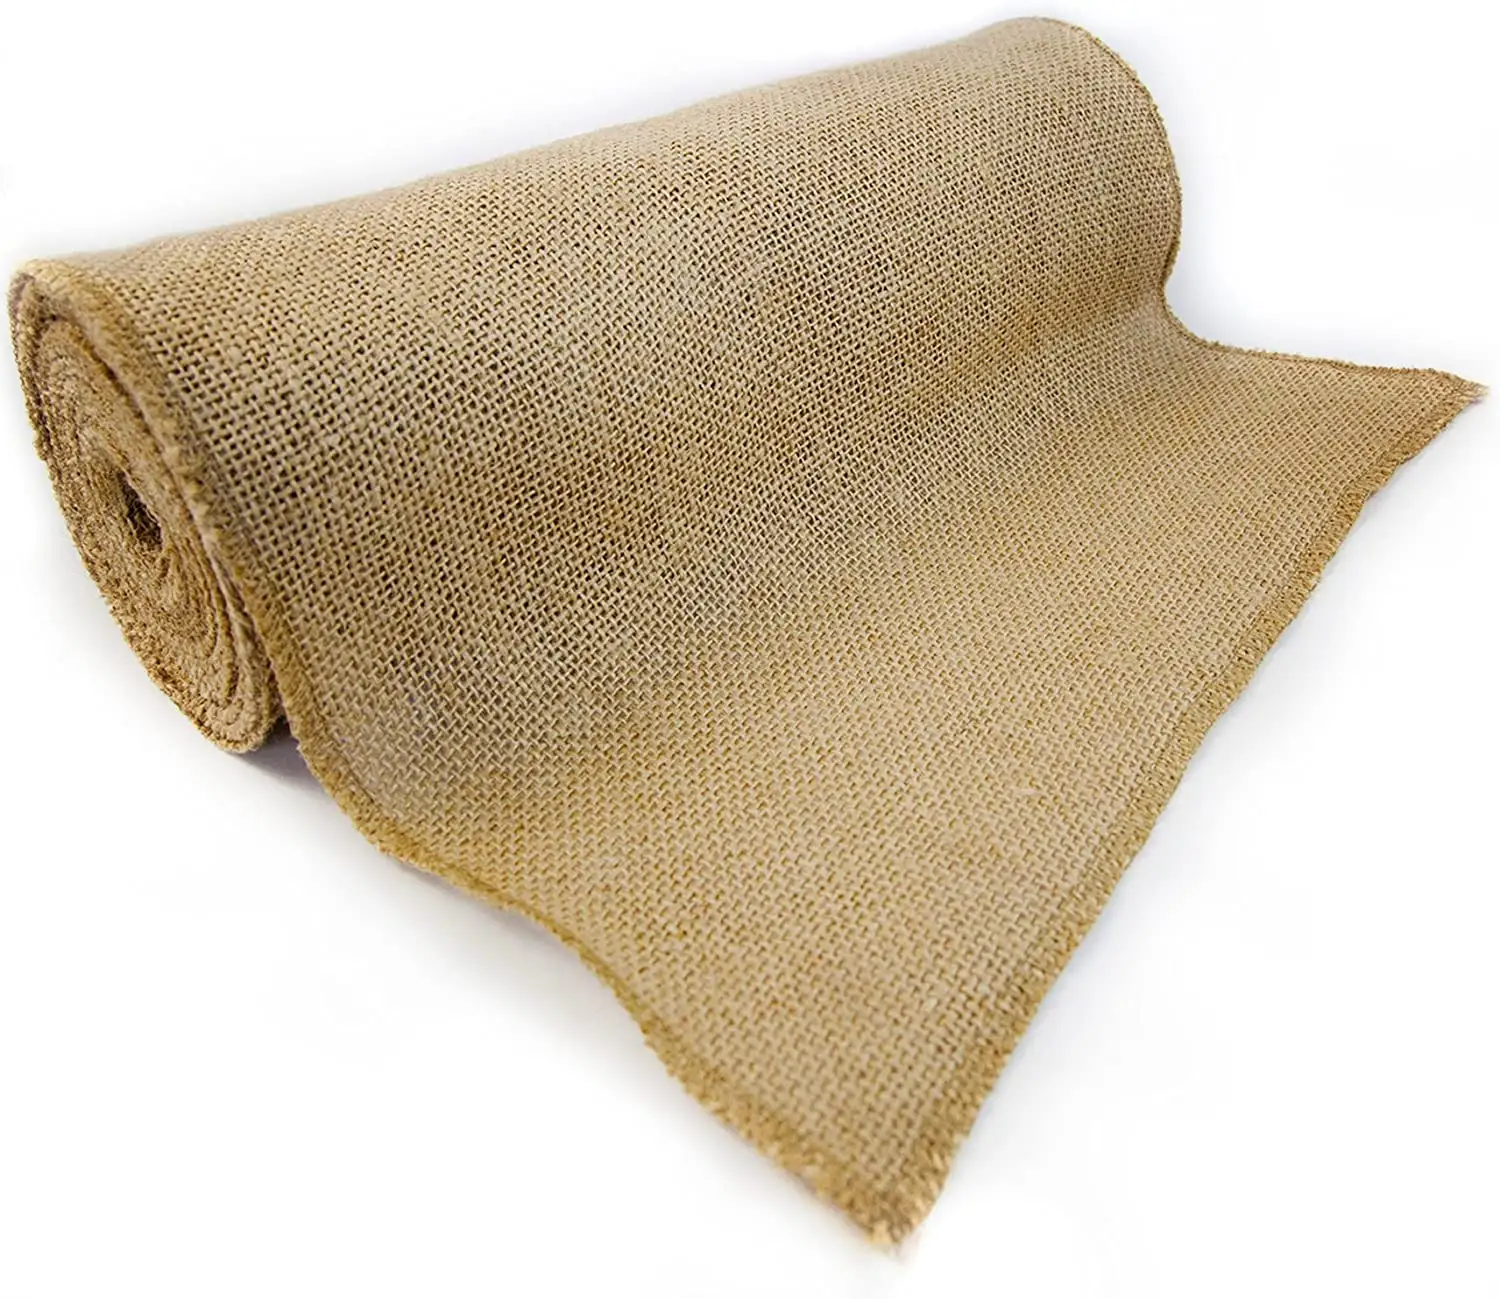 NO-FRAY Woven 100% Natural Burlap Jute Roll  Fabric with Finished Edges for  Weddings Table Runners Place mat Crafts Decoration